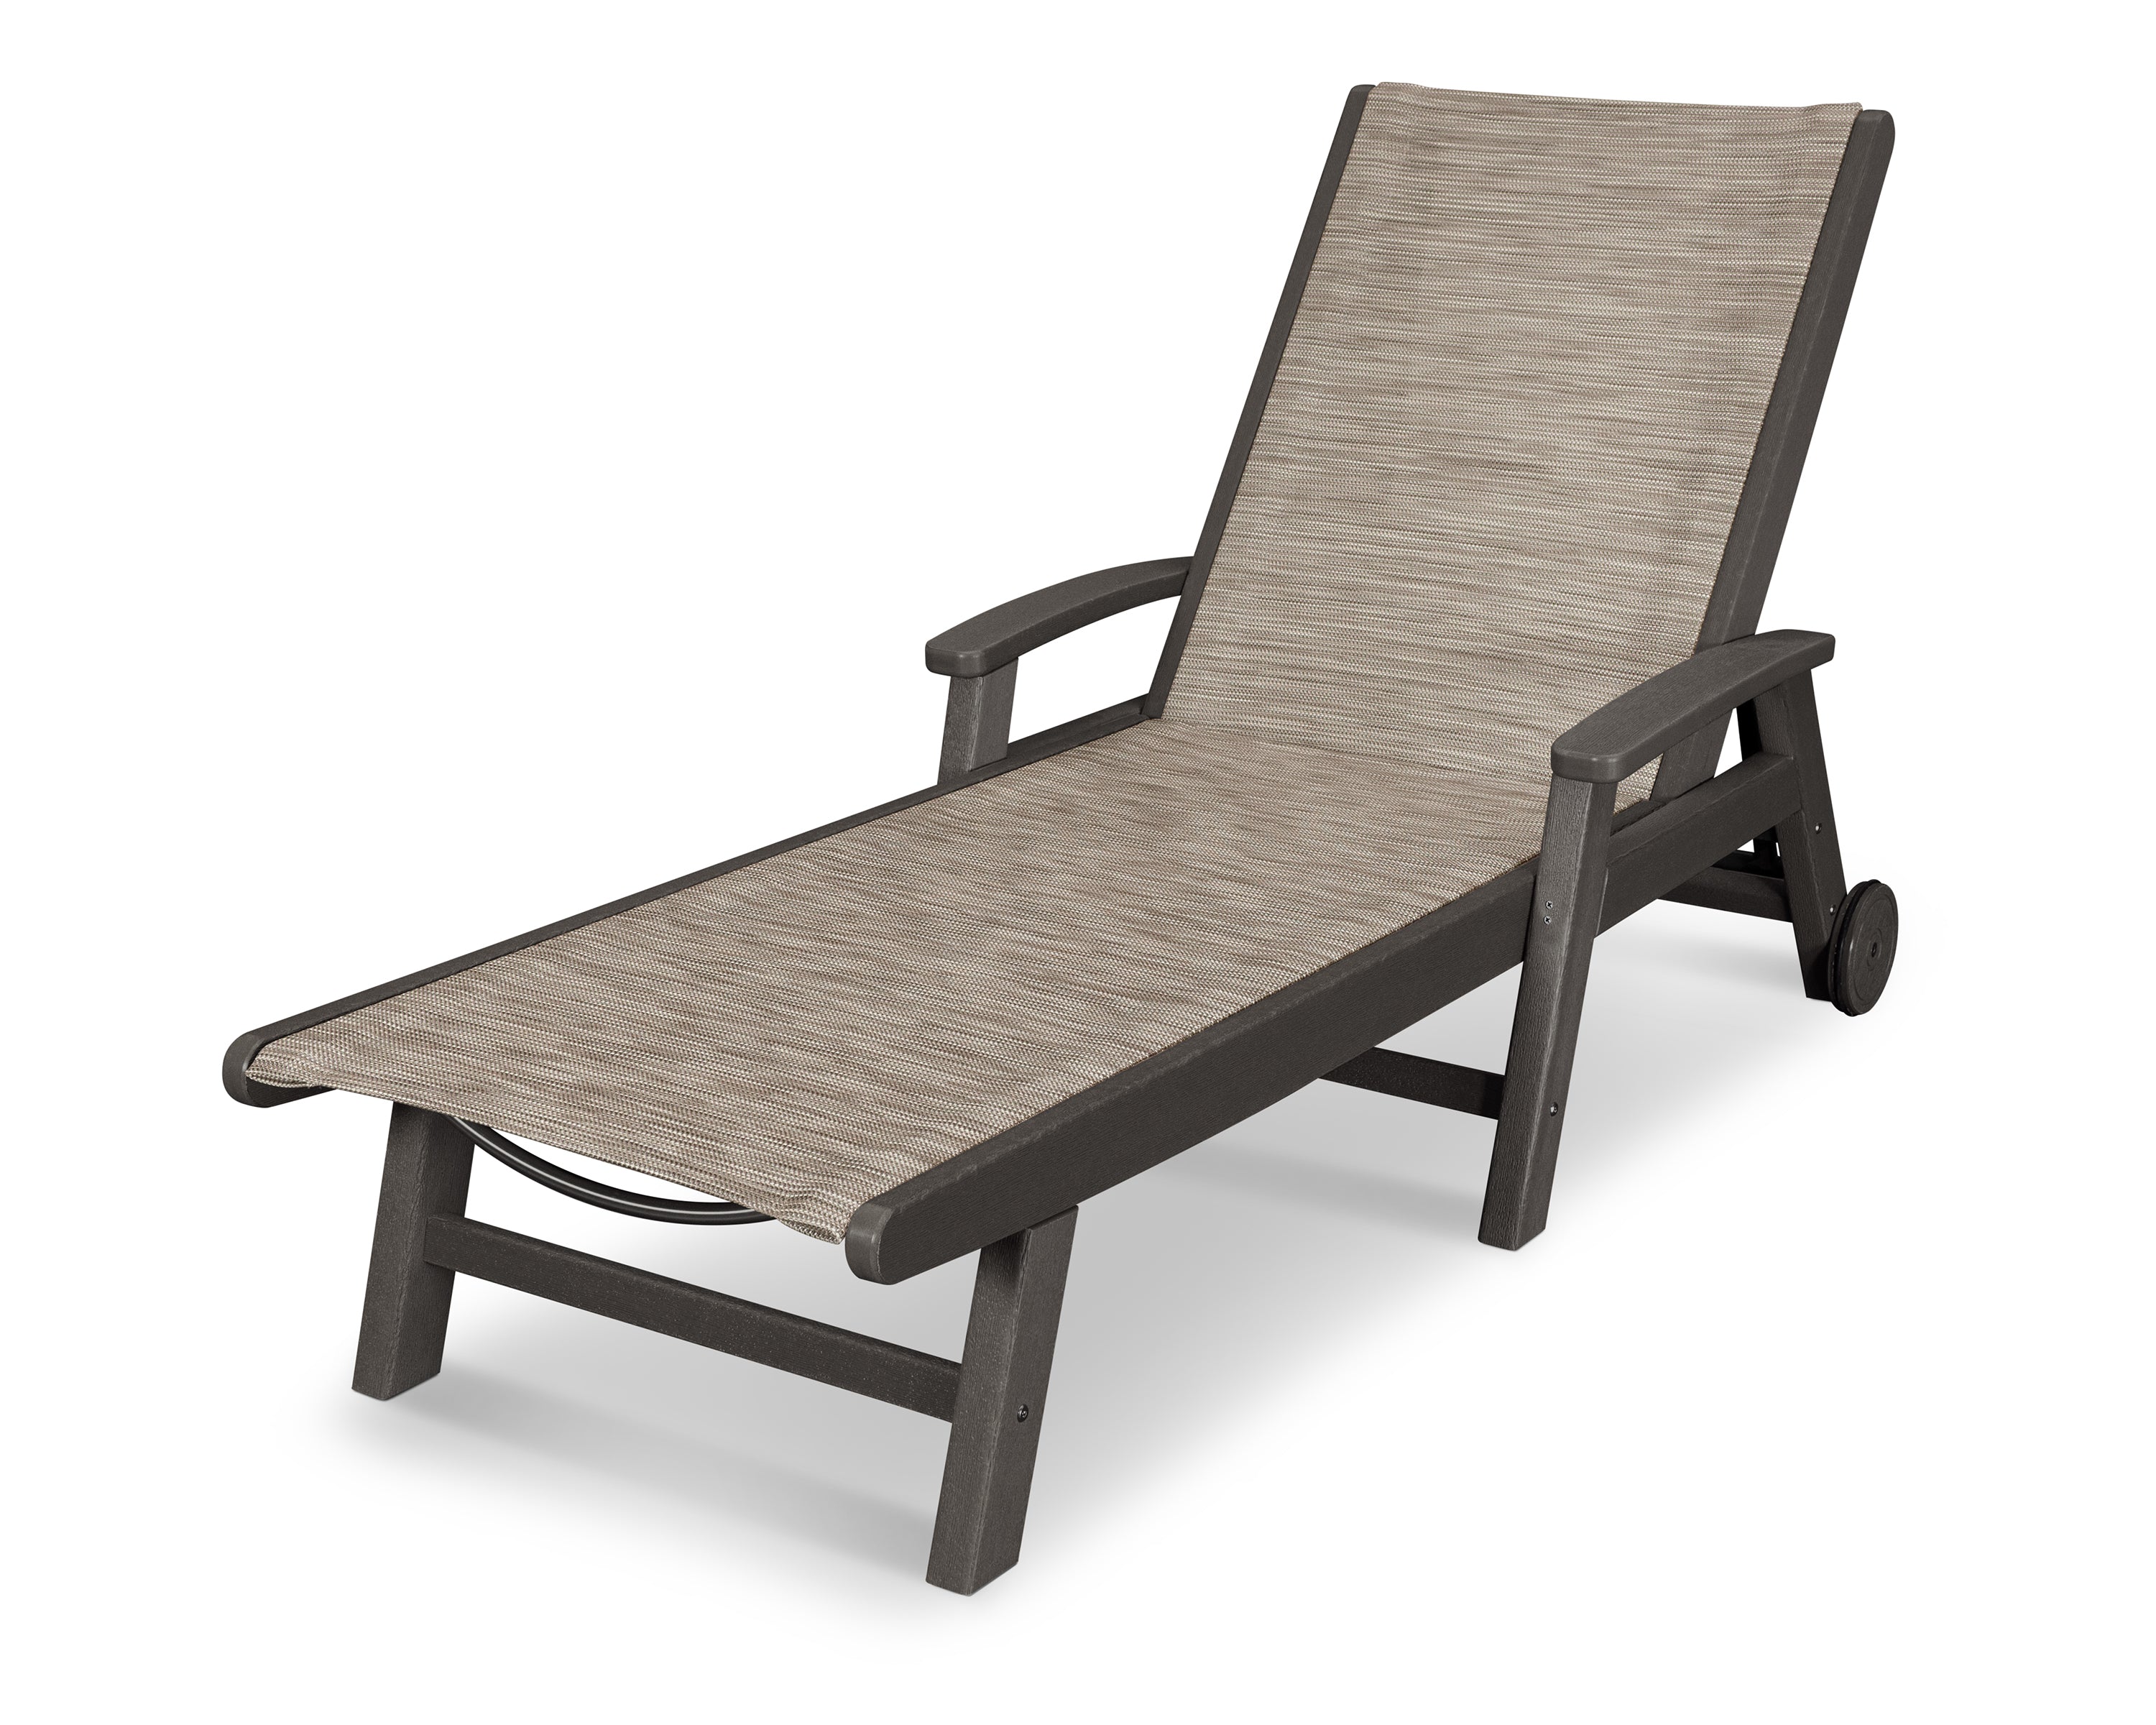 Polywood Coastal Chaise Sling Lounge with Vintage Coffee Finish and Onyx Sling Sunloungers 12039491